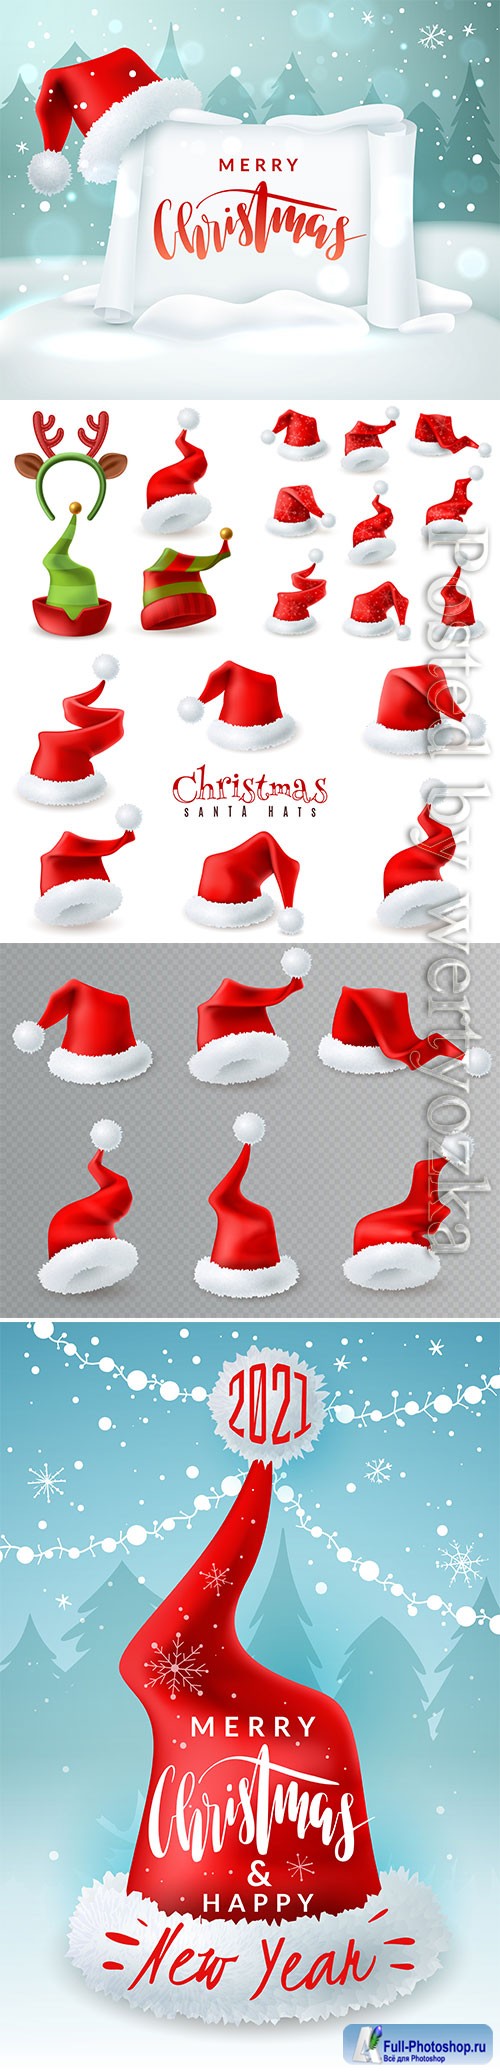 Merry christmas greeting with santa hat illustration vector